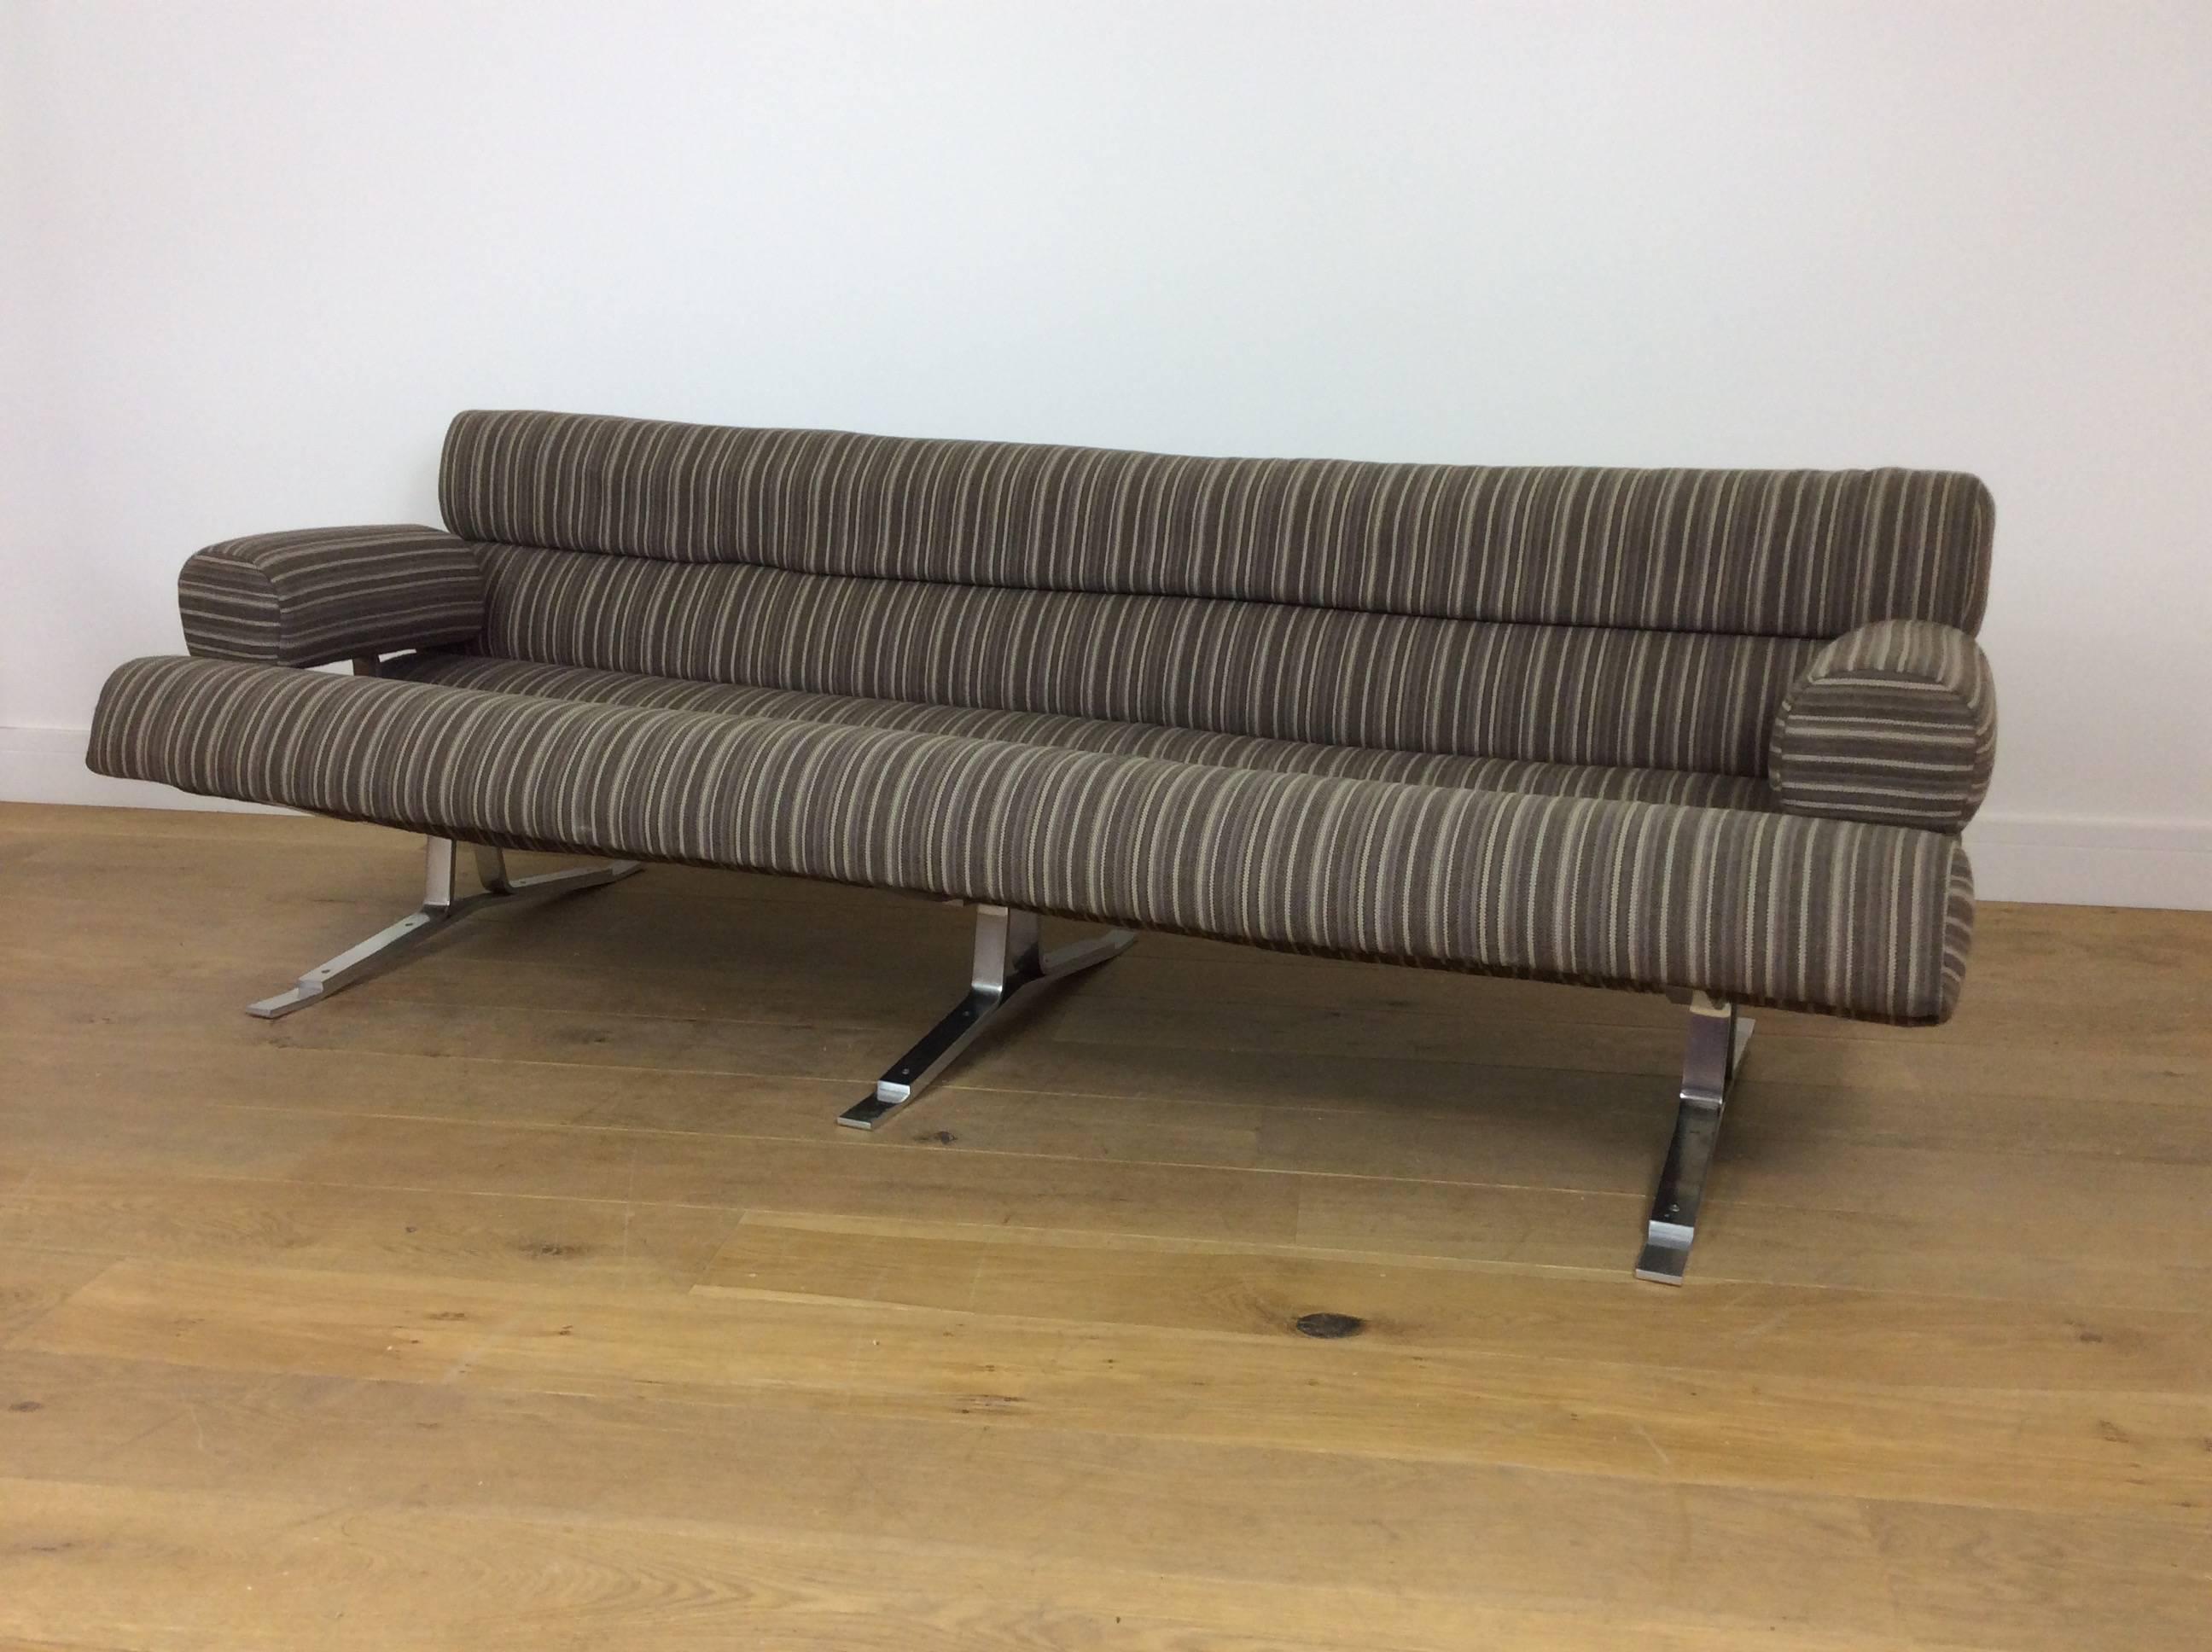 Midcentury Sofa by William Plunkett Model, WP01 In Good Condition For Sale In London, GB